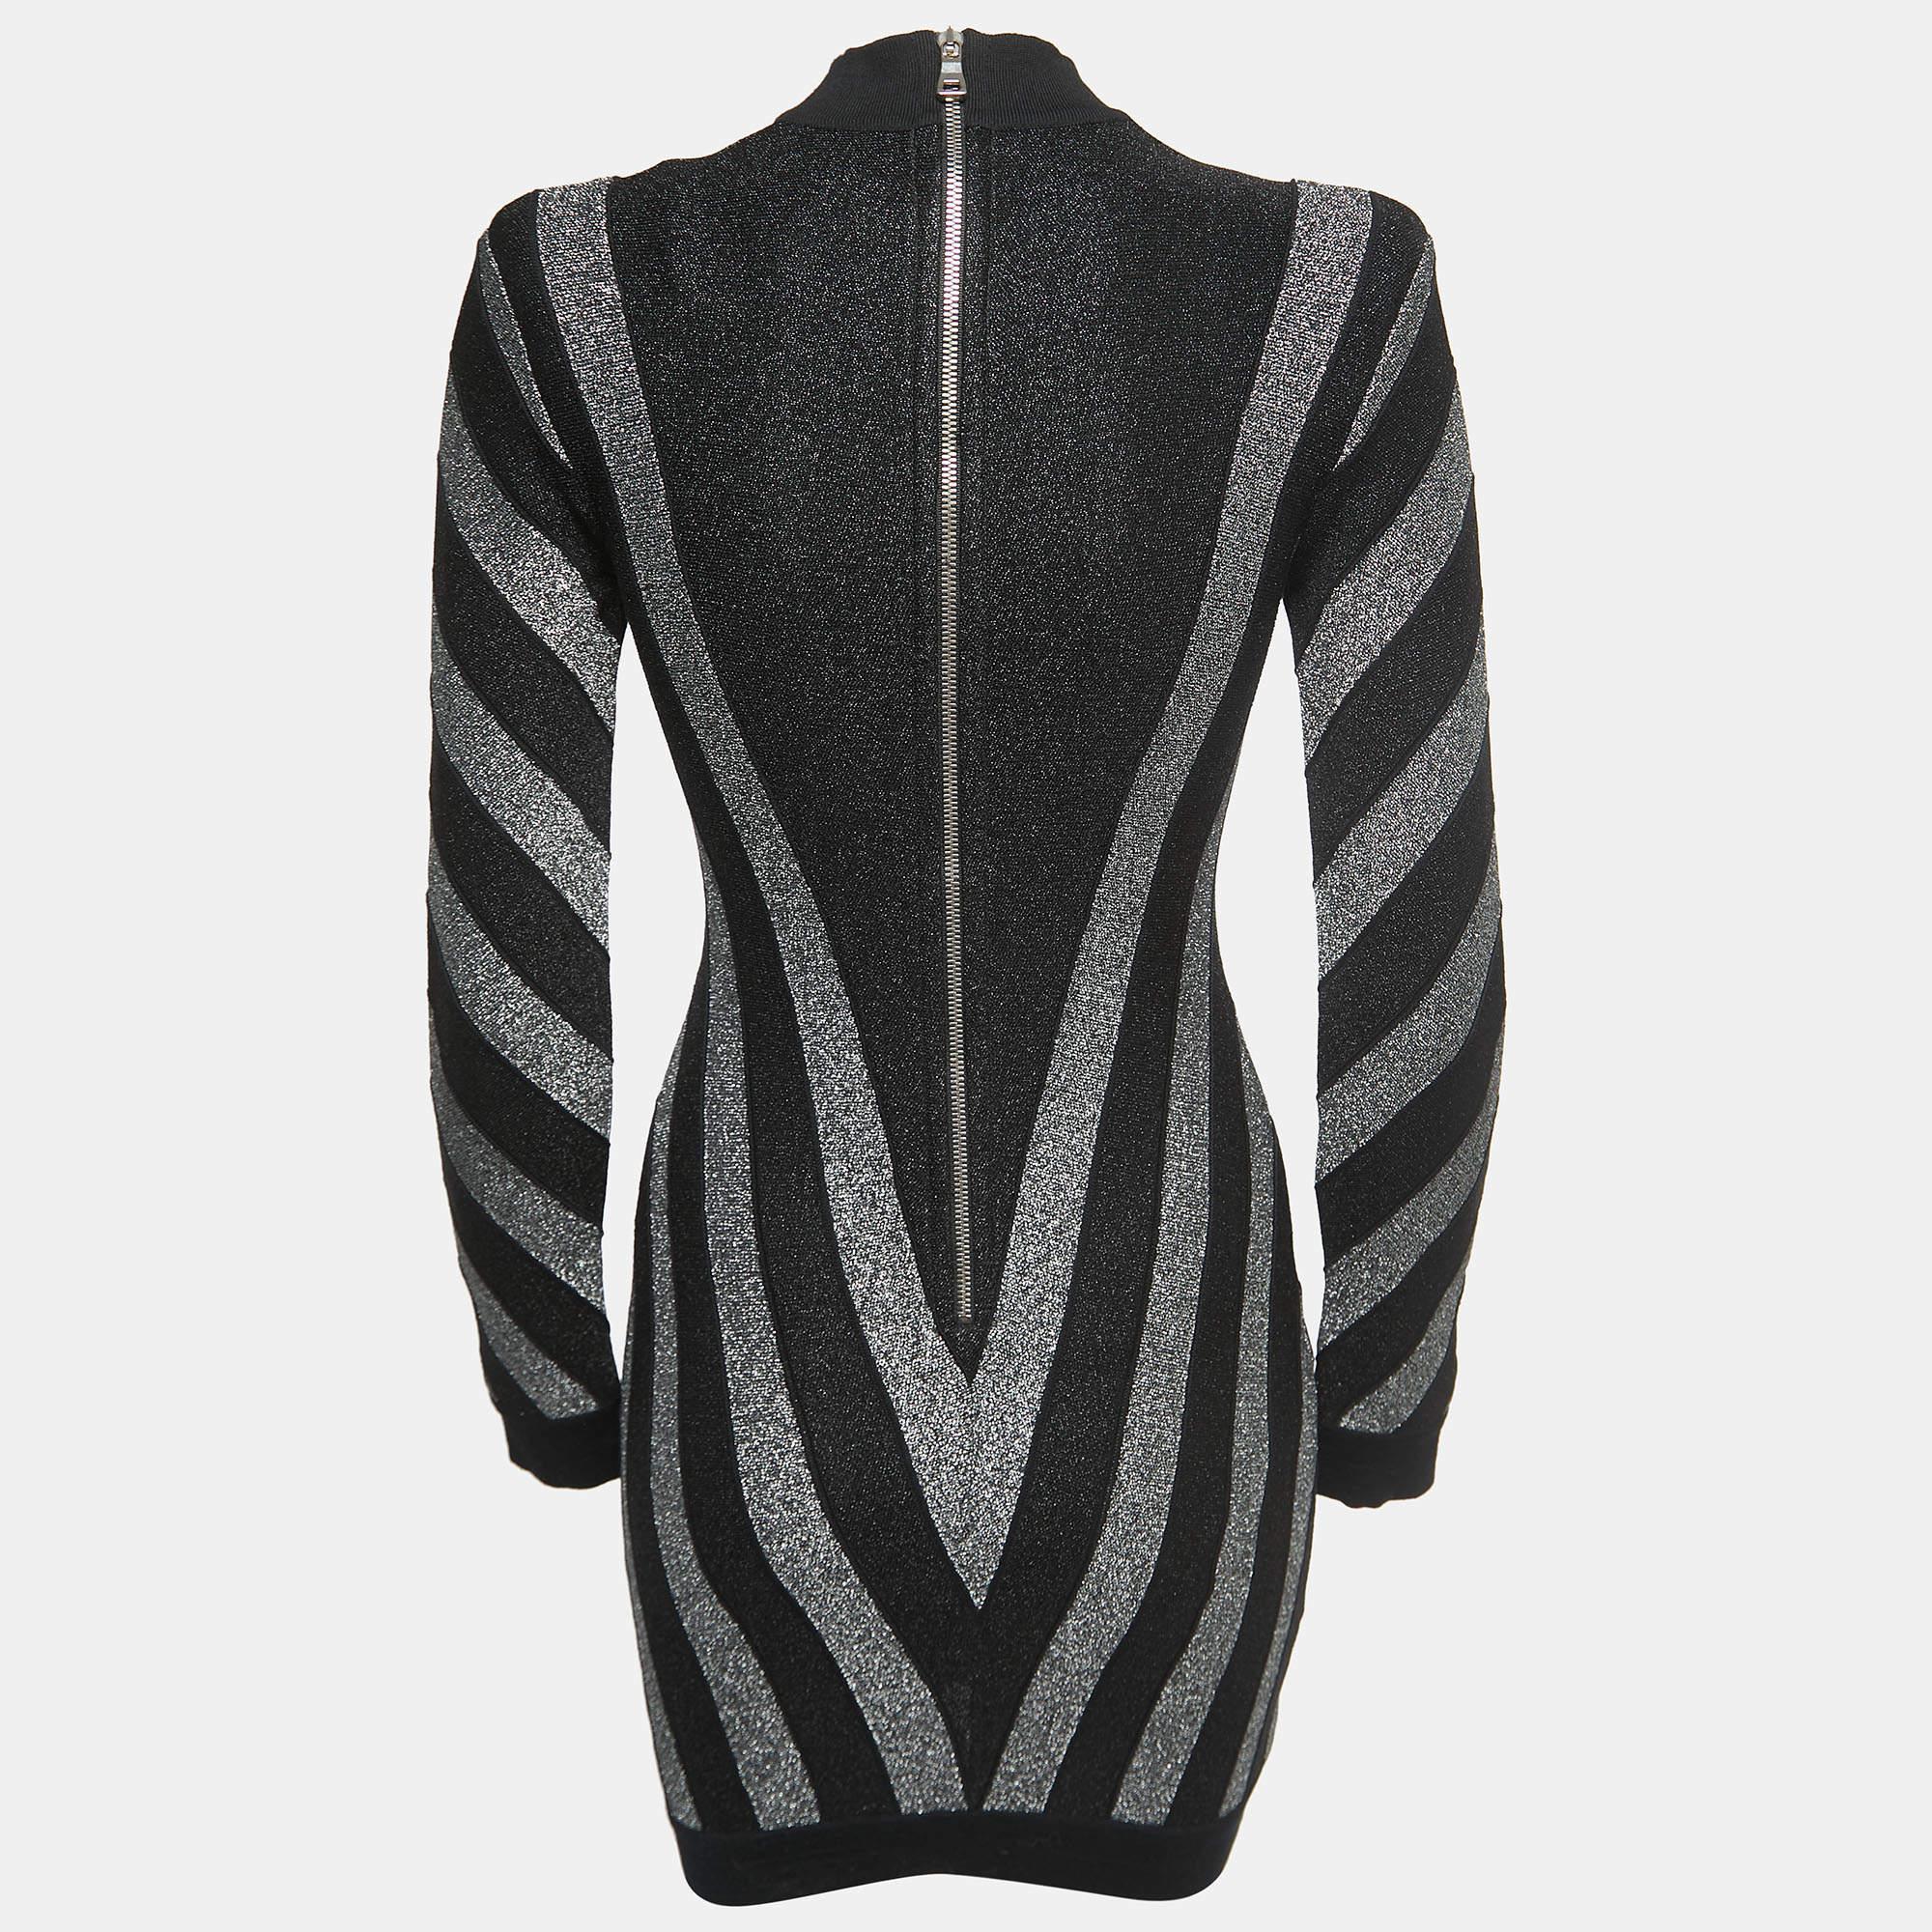 This glittery Balmain bodycon dress has a lovely silhouette and stripe details. It is made from the finest materials and is bound to give you comfort.

